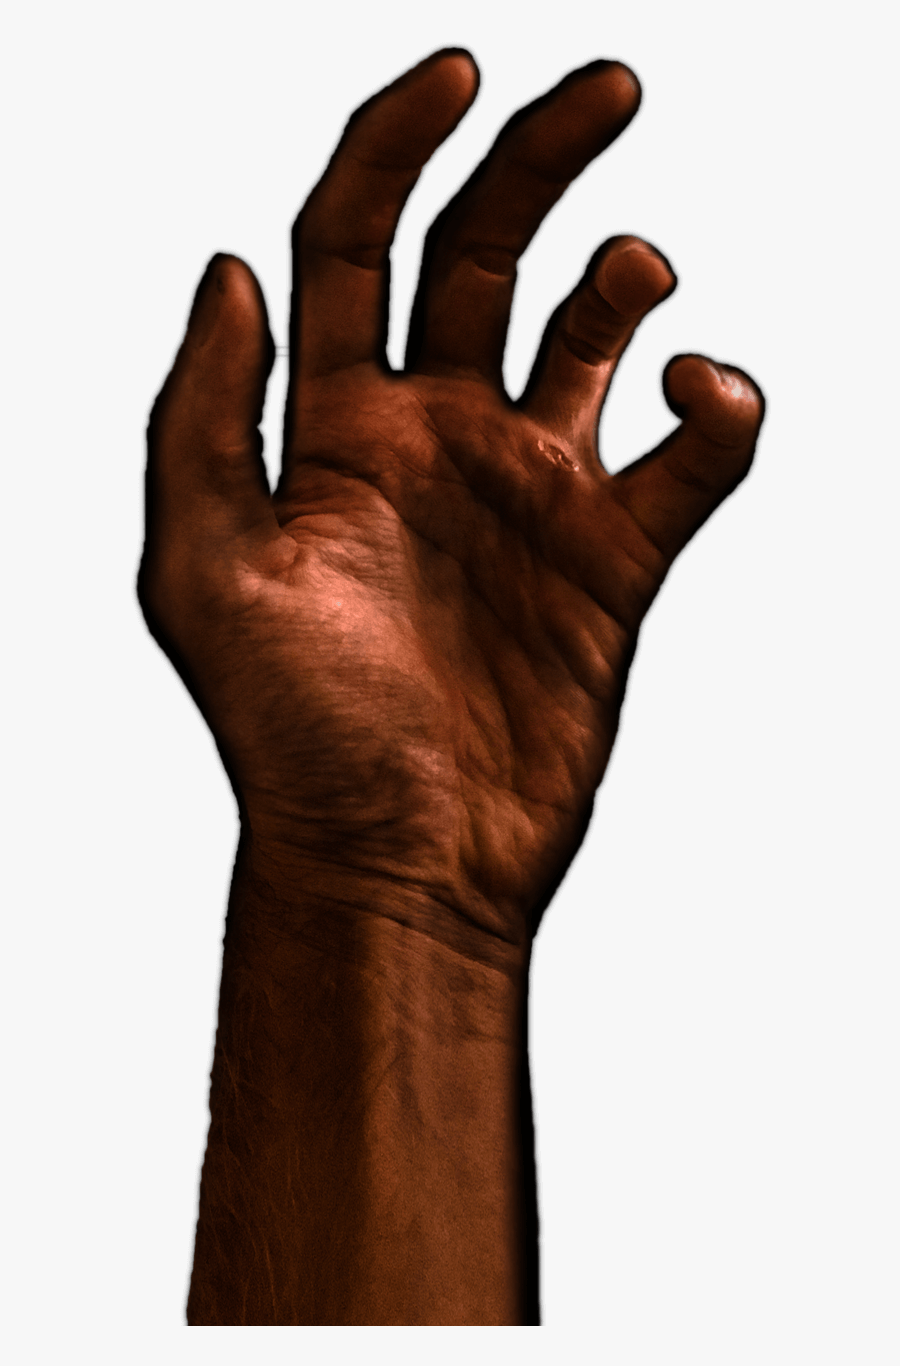 Transparent Hand Reaching Out Png - Hands Reaching Out Png, Transparent Clipart